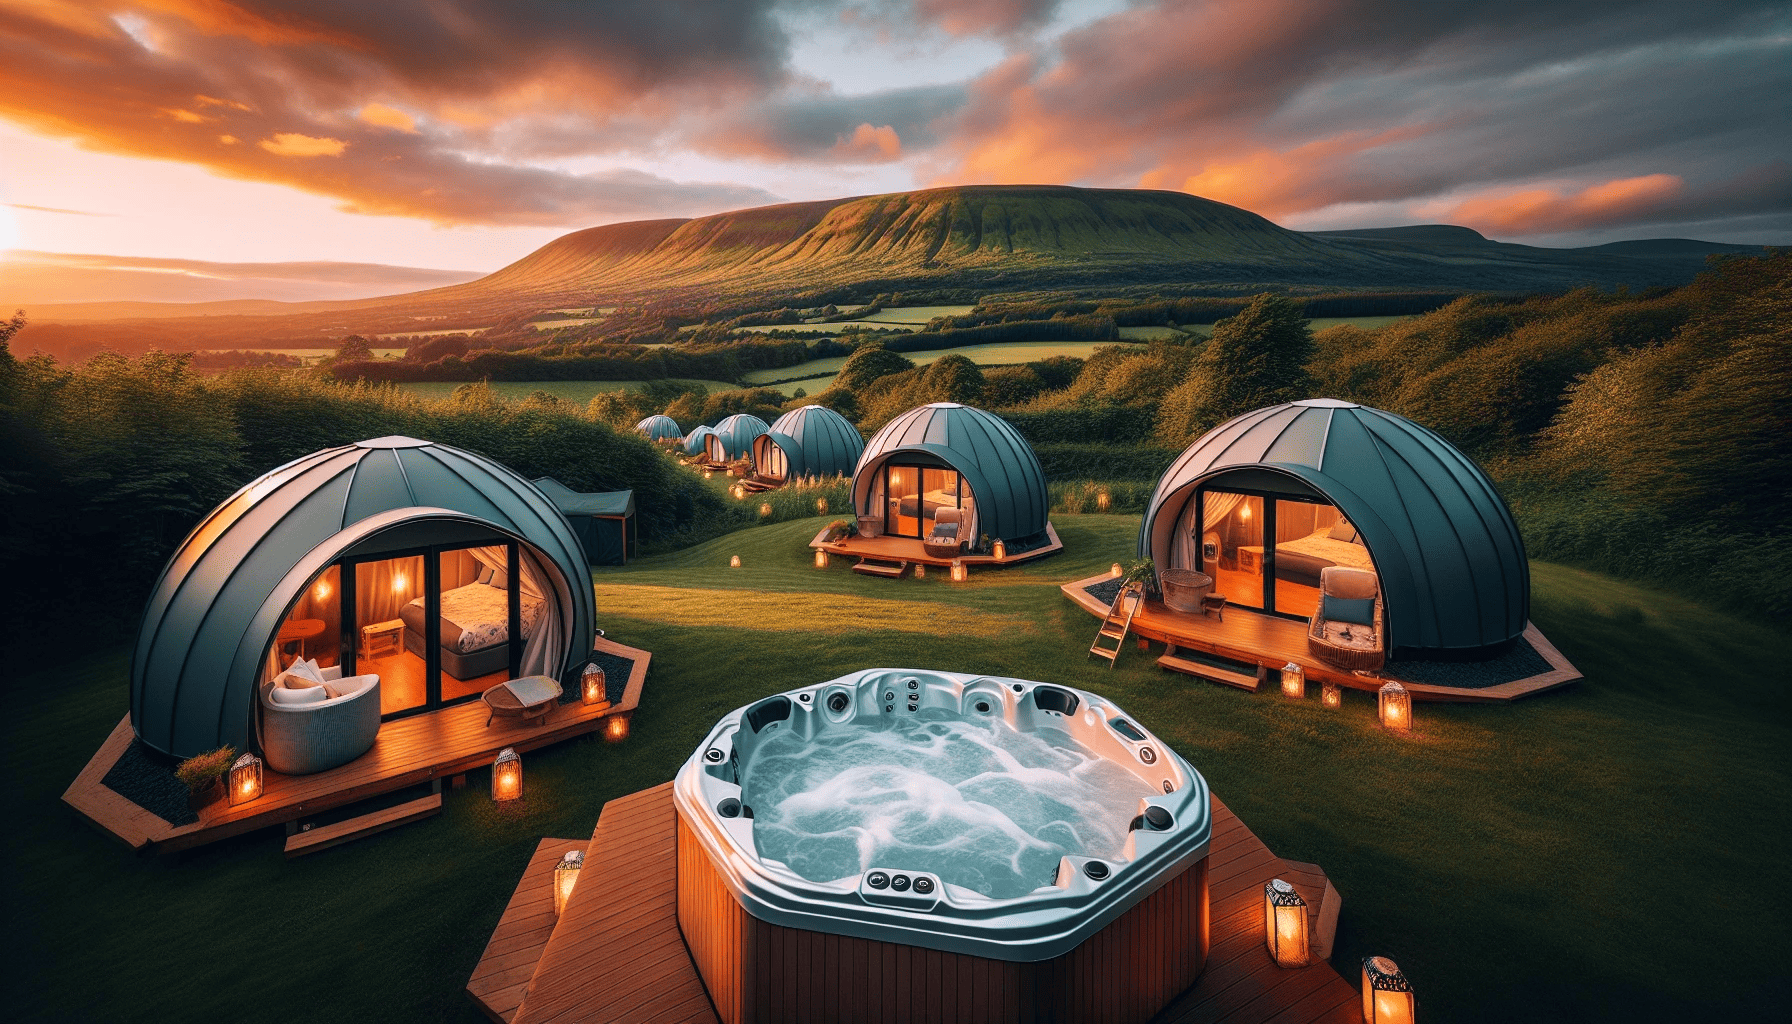 Luxurious glamping pods with private hot tub in Northern Ireland